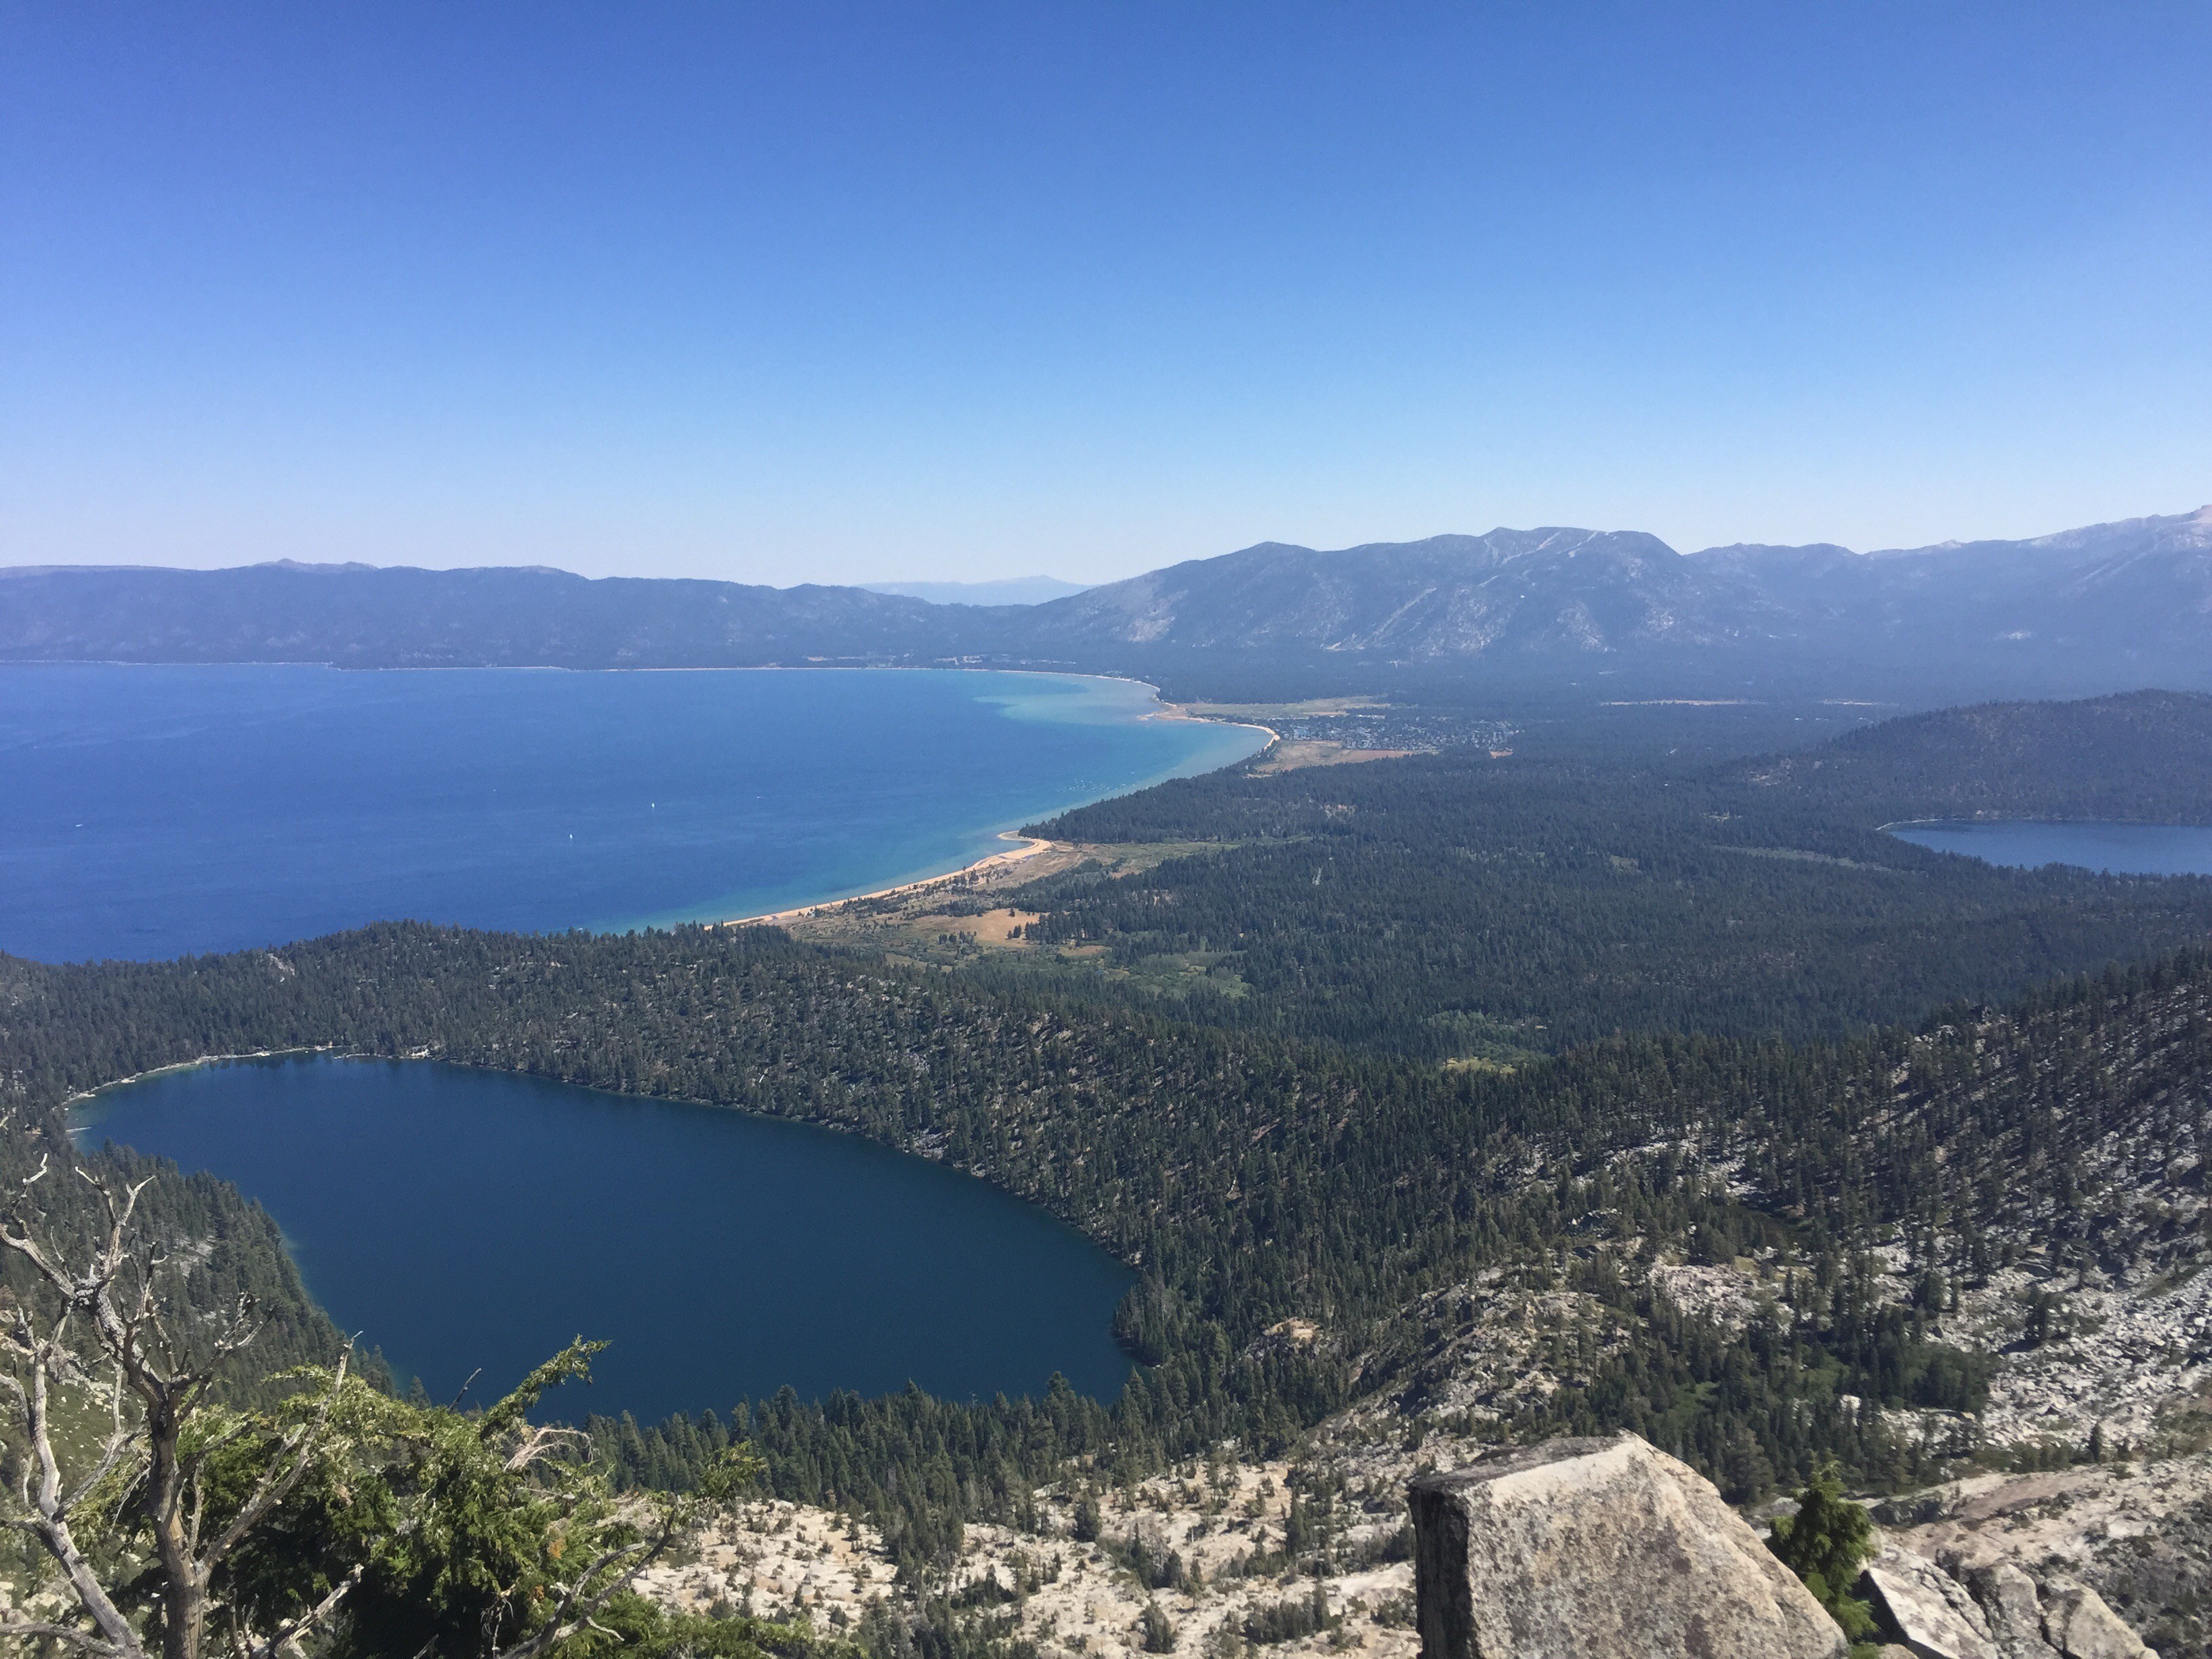 Lake Tahoe in the upper-middle left side, Cascade Lake on the lower left, and northern edge of Fallen Leaf Lake on the far right. You can also see Lake Tahoe Blvd and the casinos at stateline if the air is clear. 8/25/2016